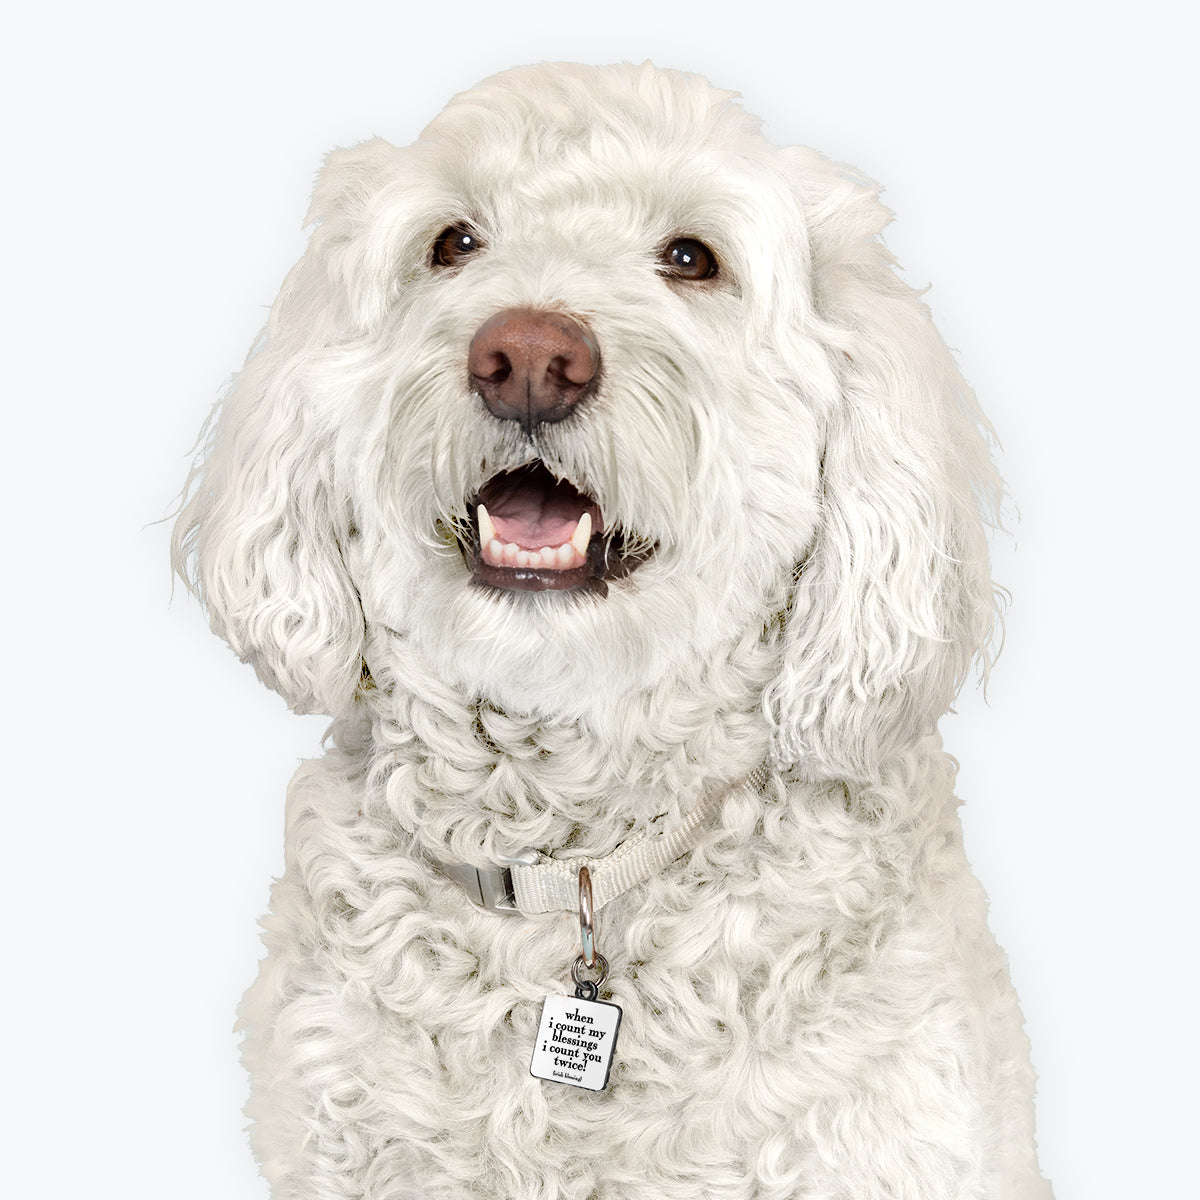 "count my blessings" pet collar charm